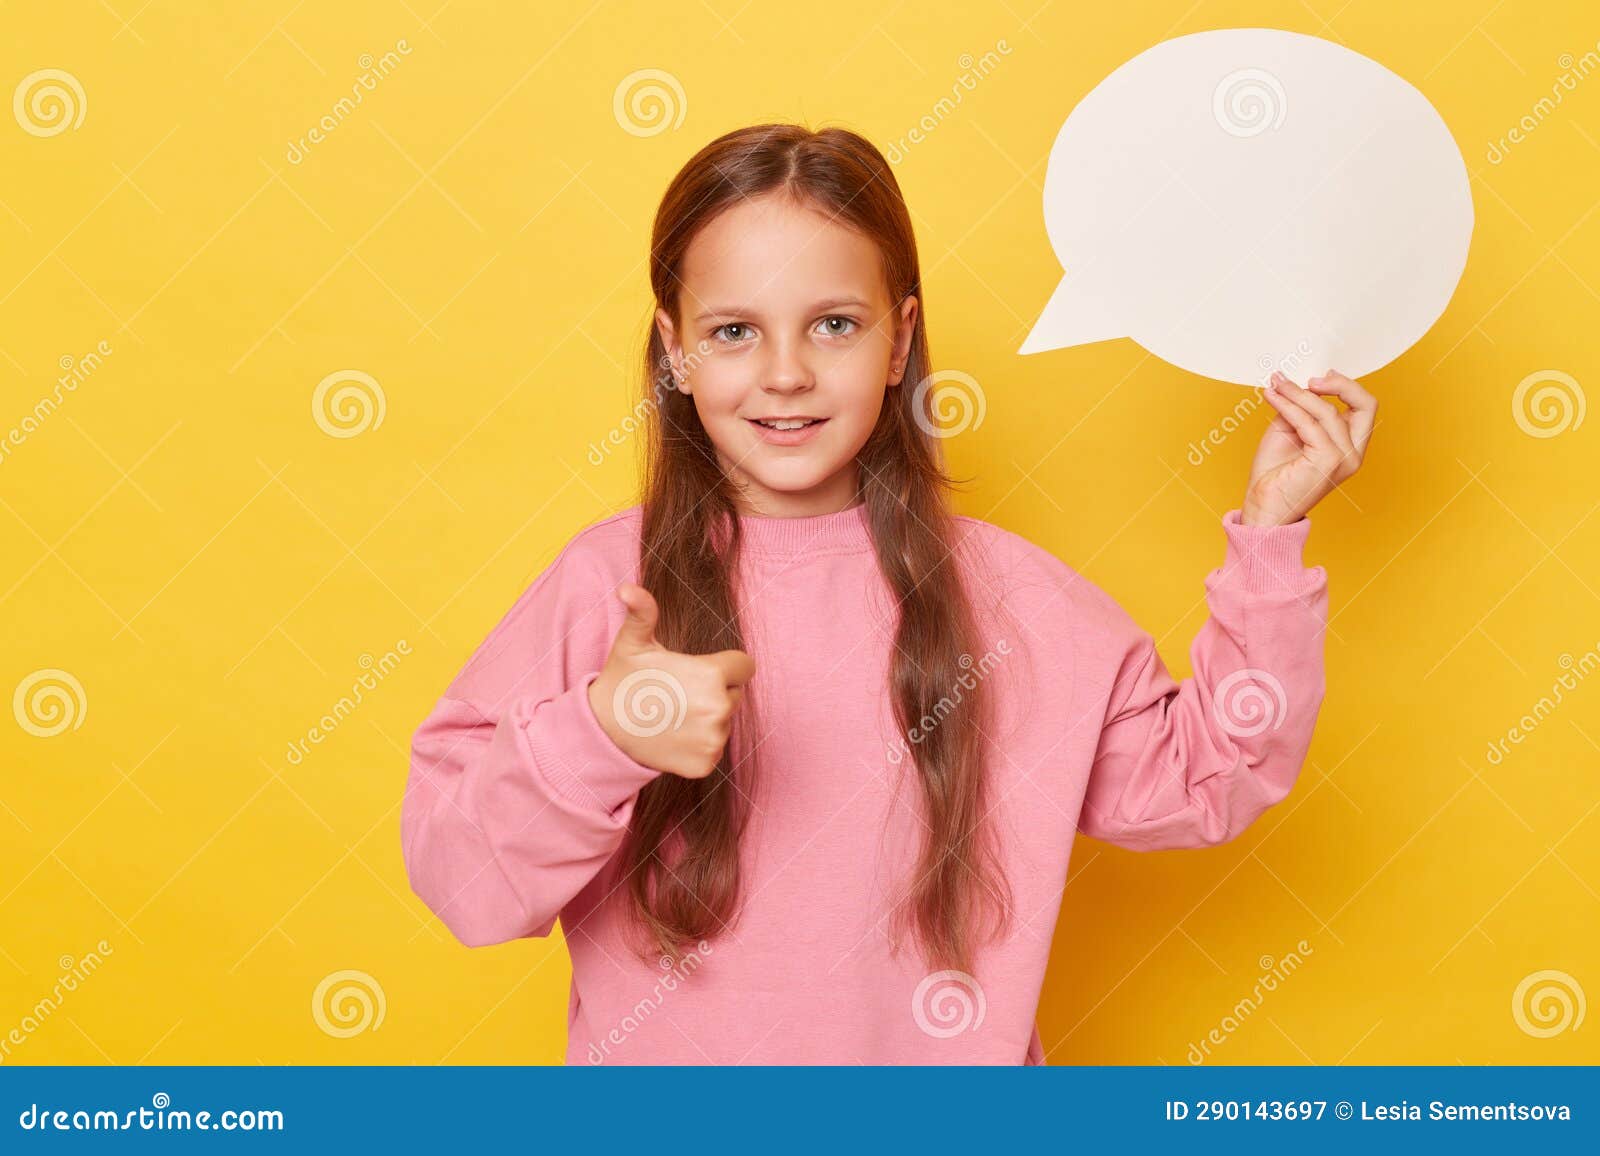 your message's canvas. thoughts in progress. unwritten dialogue space. little kid girl wearing pink sweatshirt  over